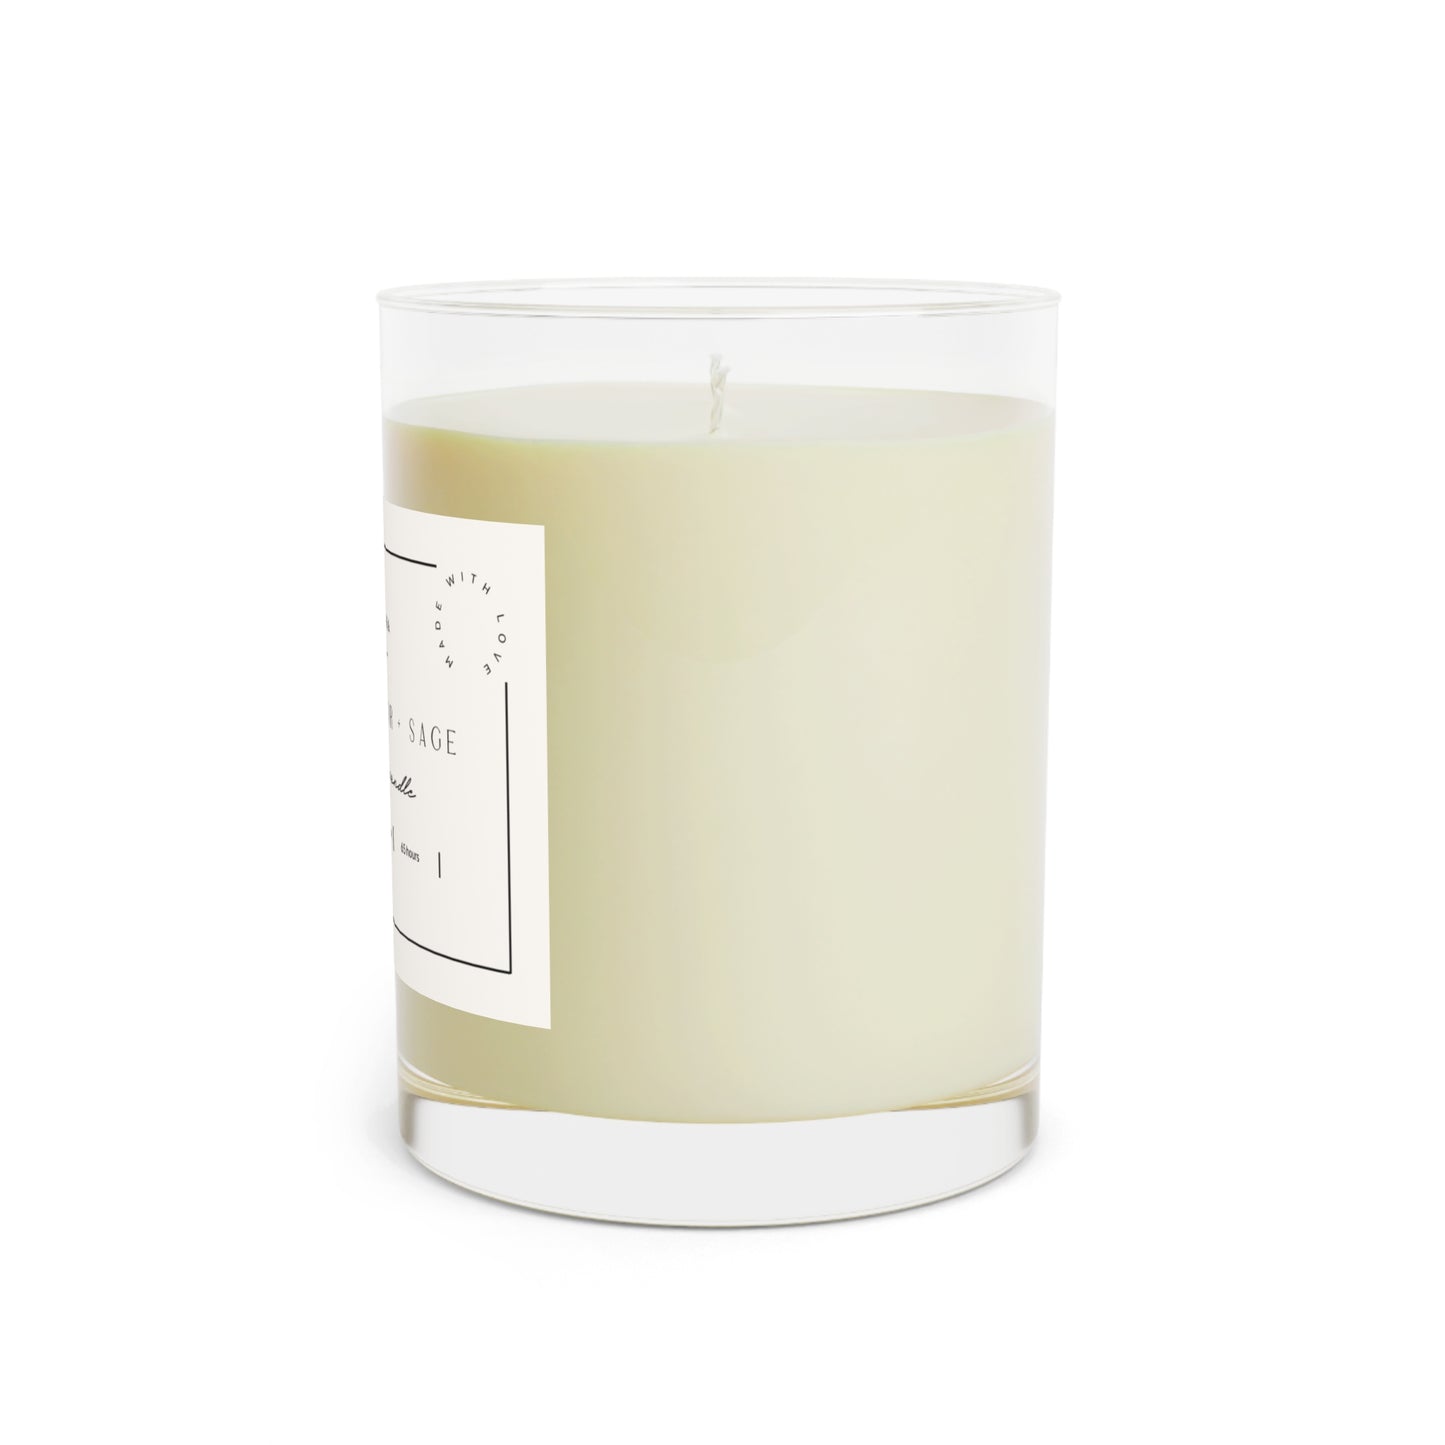 Minted Lavender and Sage Scented Candle - 100% food-grade soy wax, 11oz